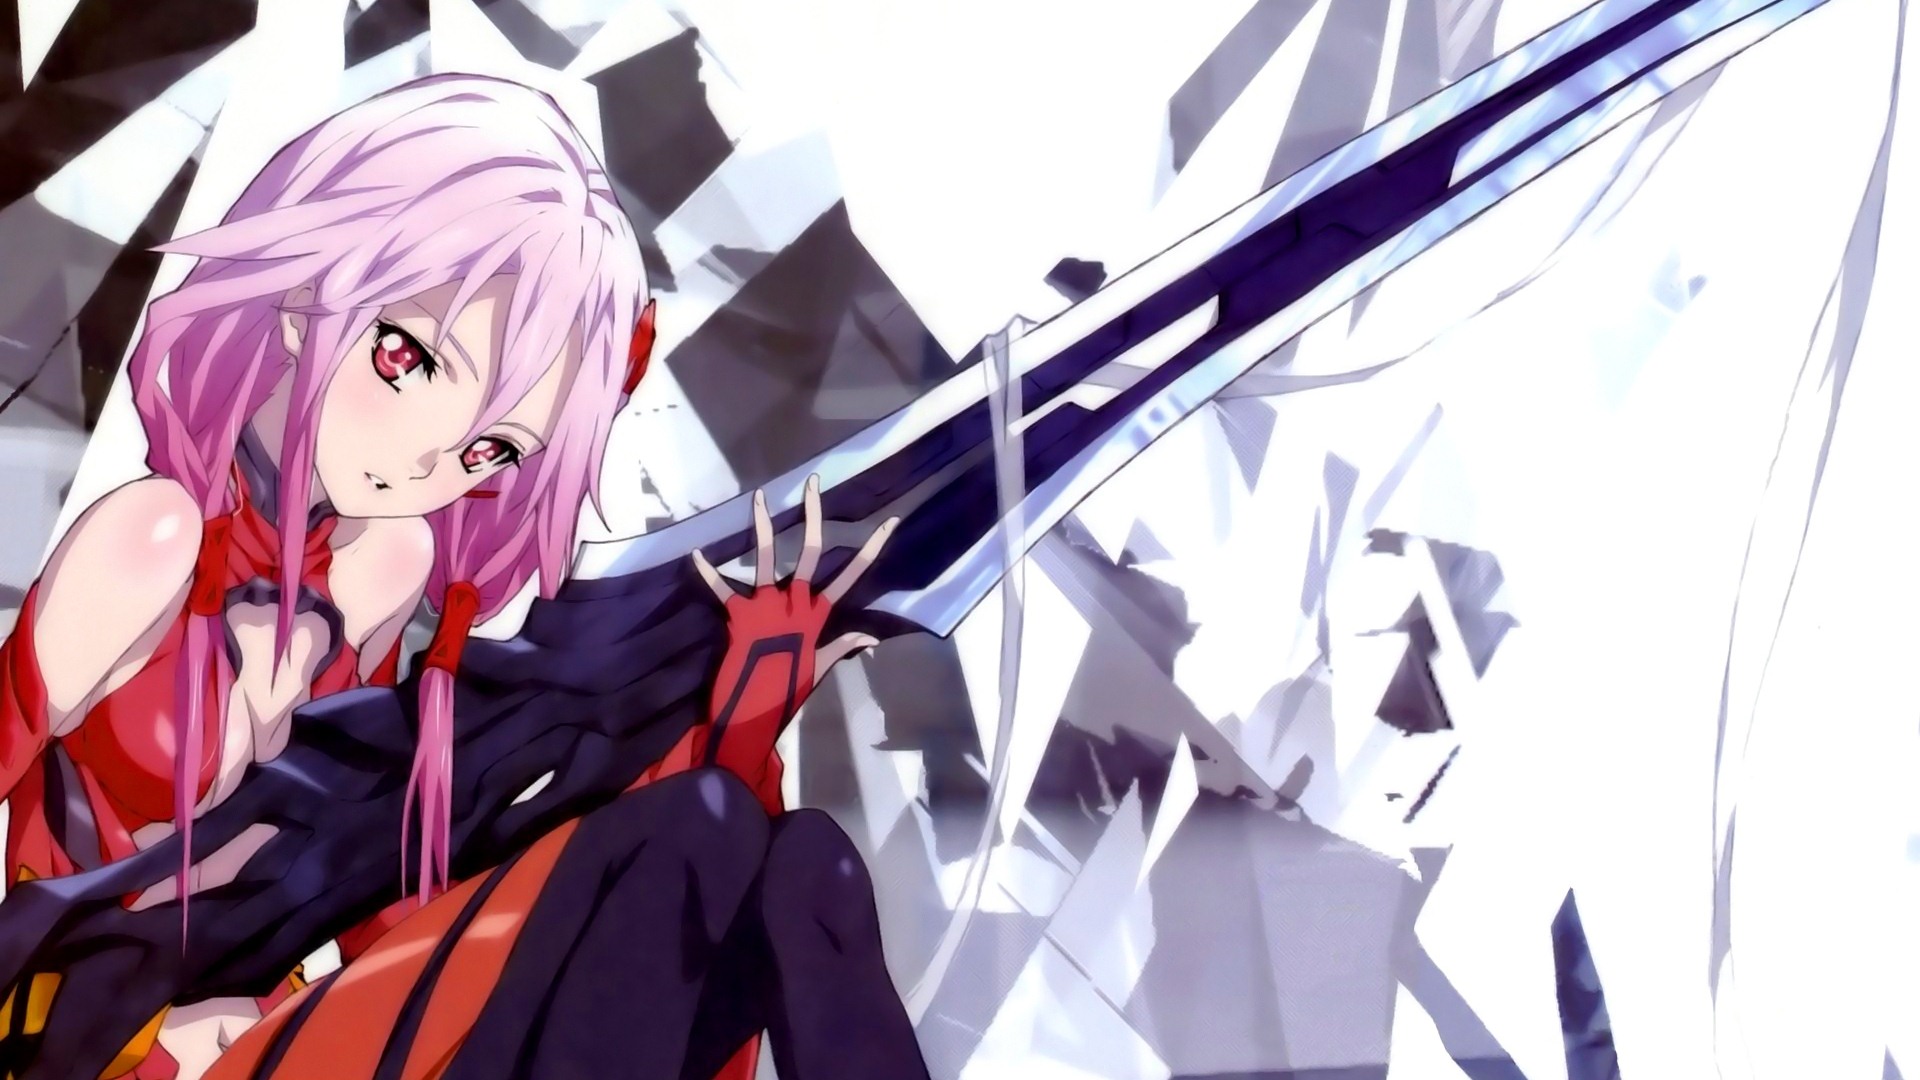 Free Download Guilty Crown Hd Wallpapers Anime Wallpaper Backgrounds Guilty Crown 19x1080 For Your Desktop Mobile Tablet Explore 46 Guilty Crown Wallpaper Hd Crown Wallpapers Inori Yuzuriha Wallpaper